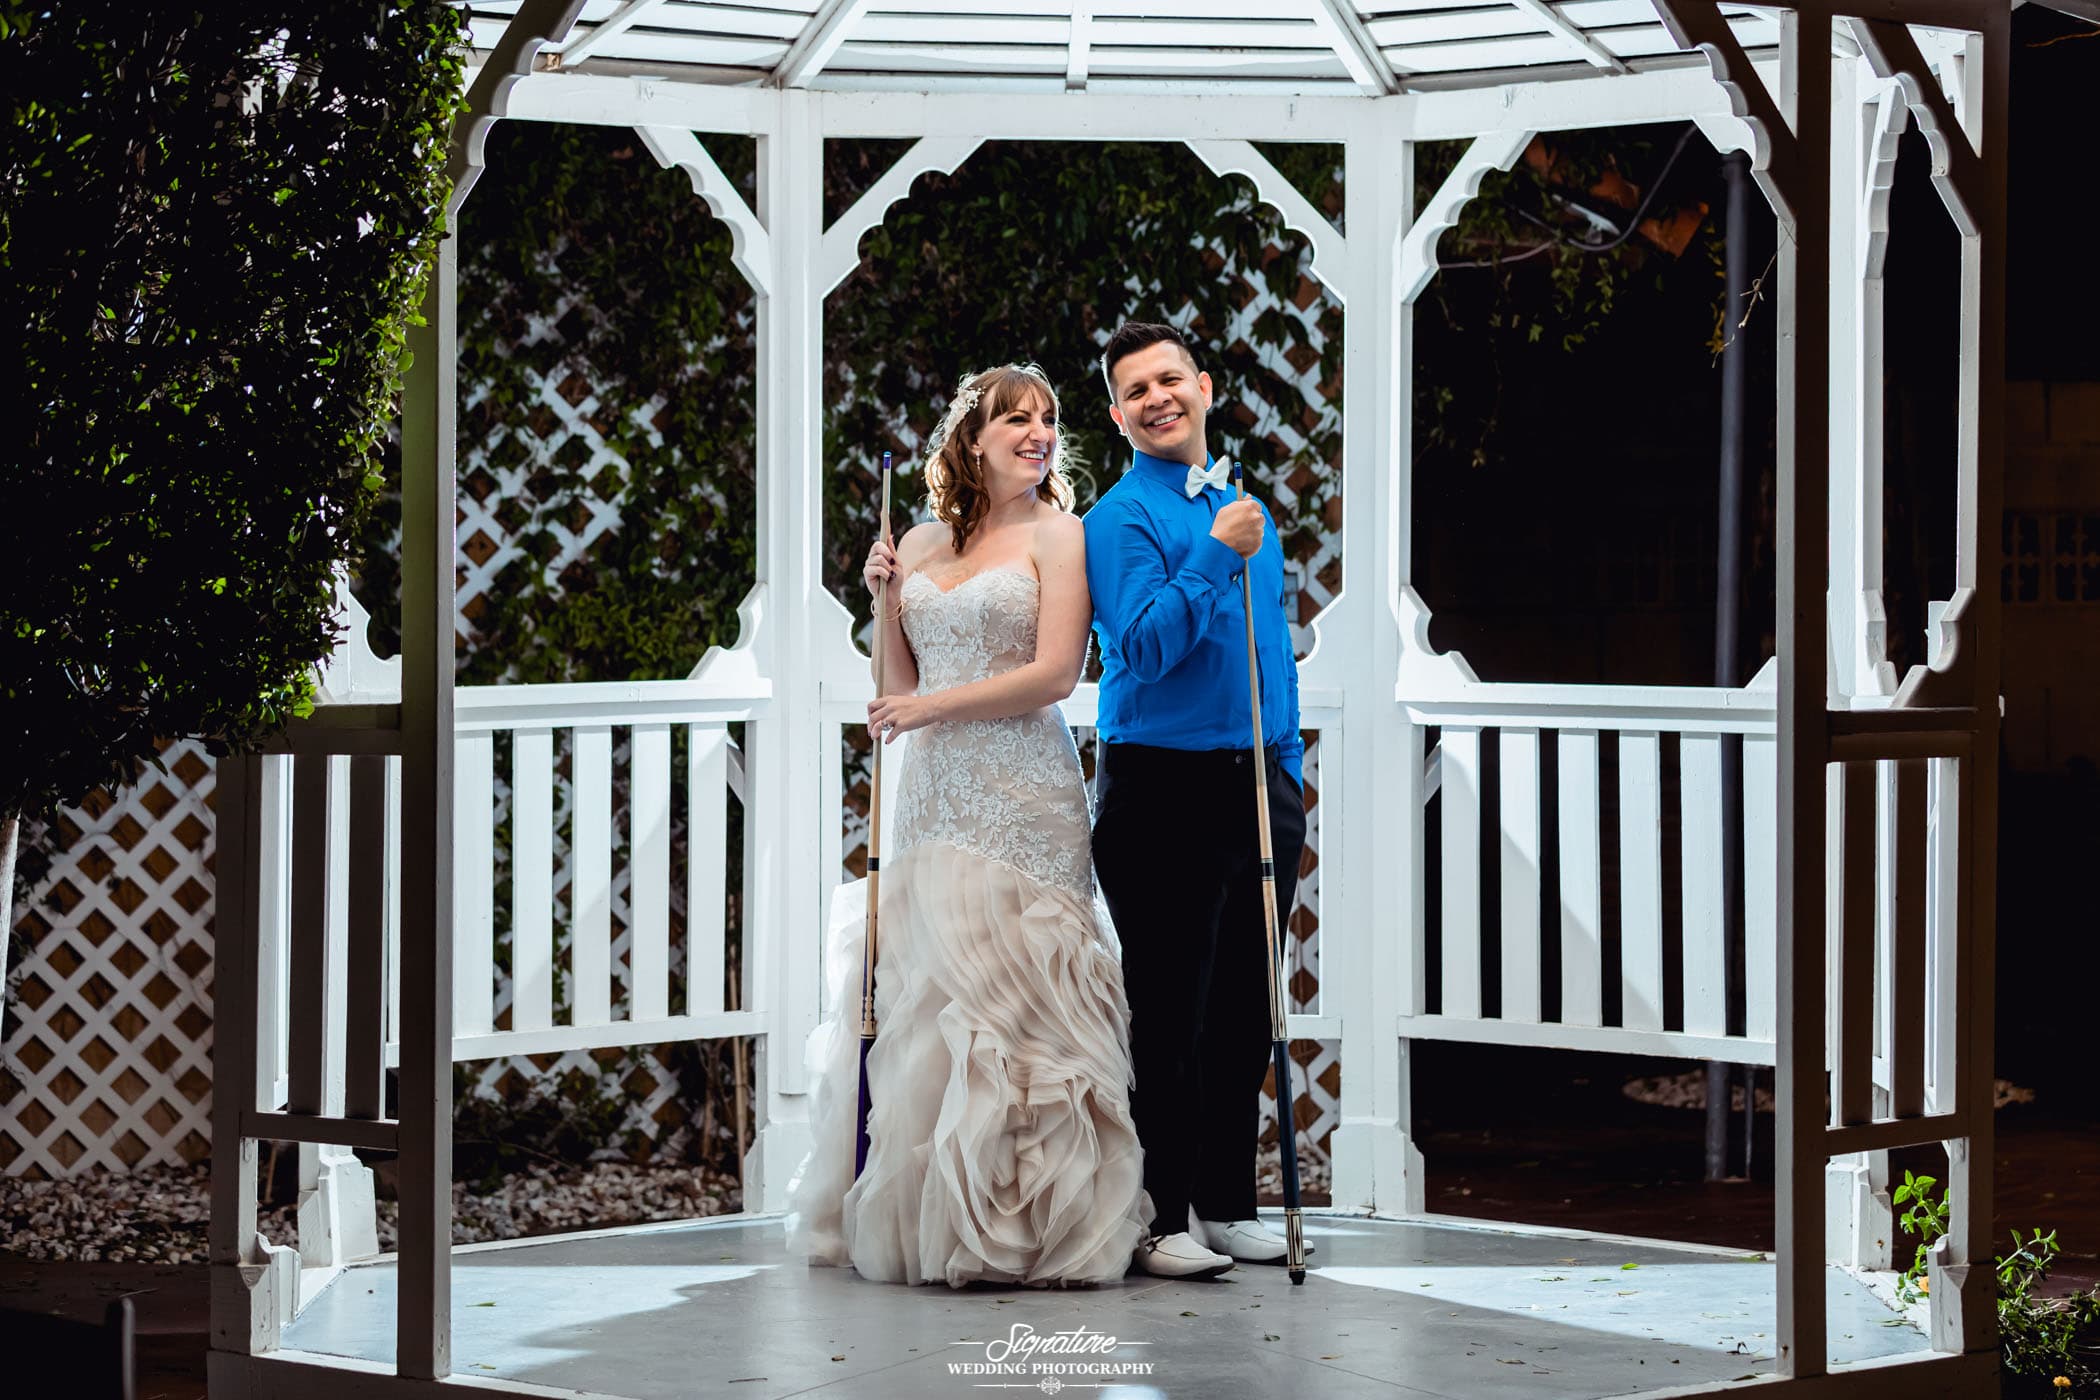 Bride and groom back to back under gazebo with pool sticks